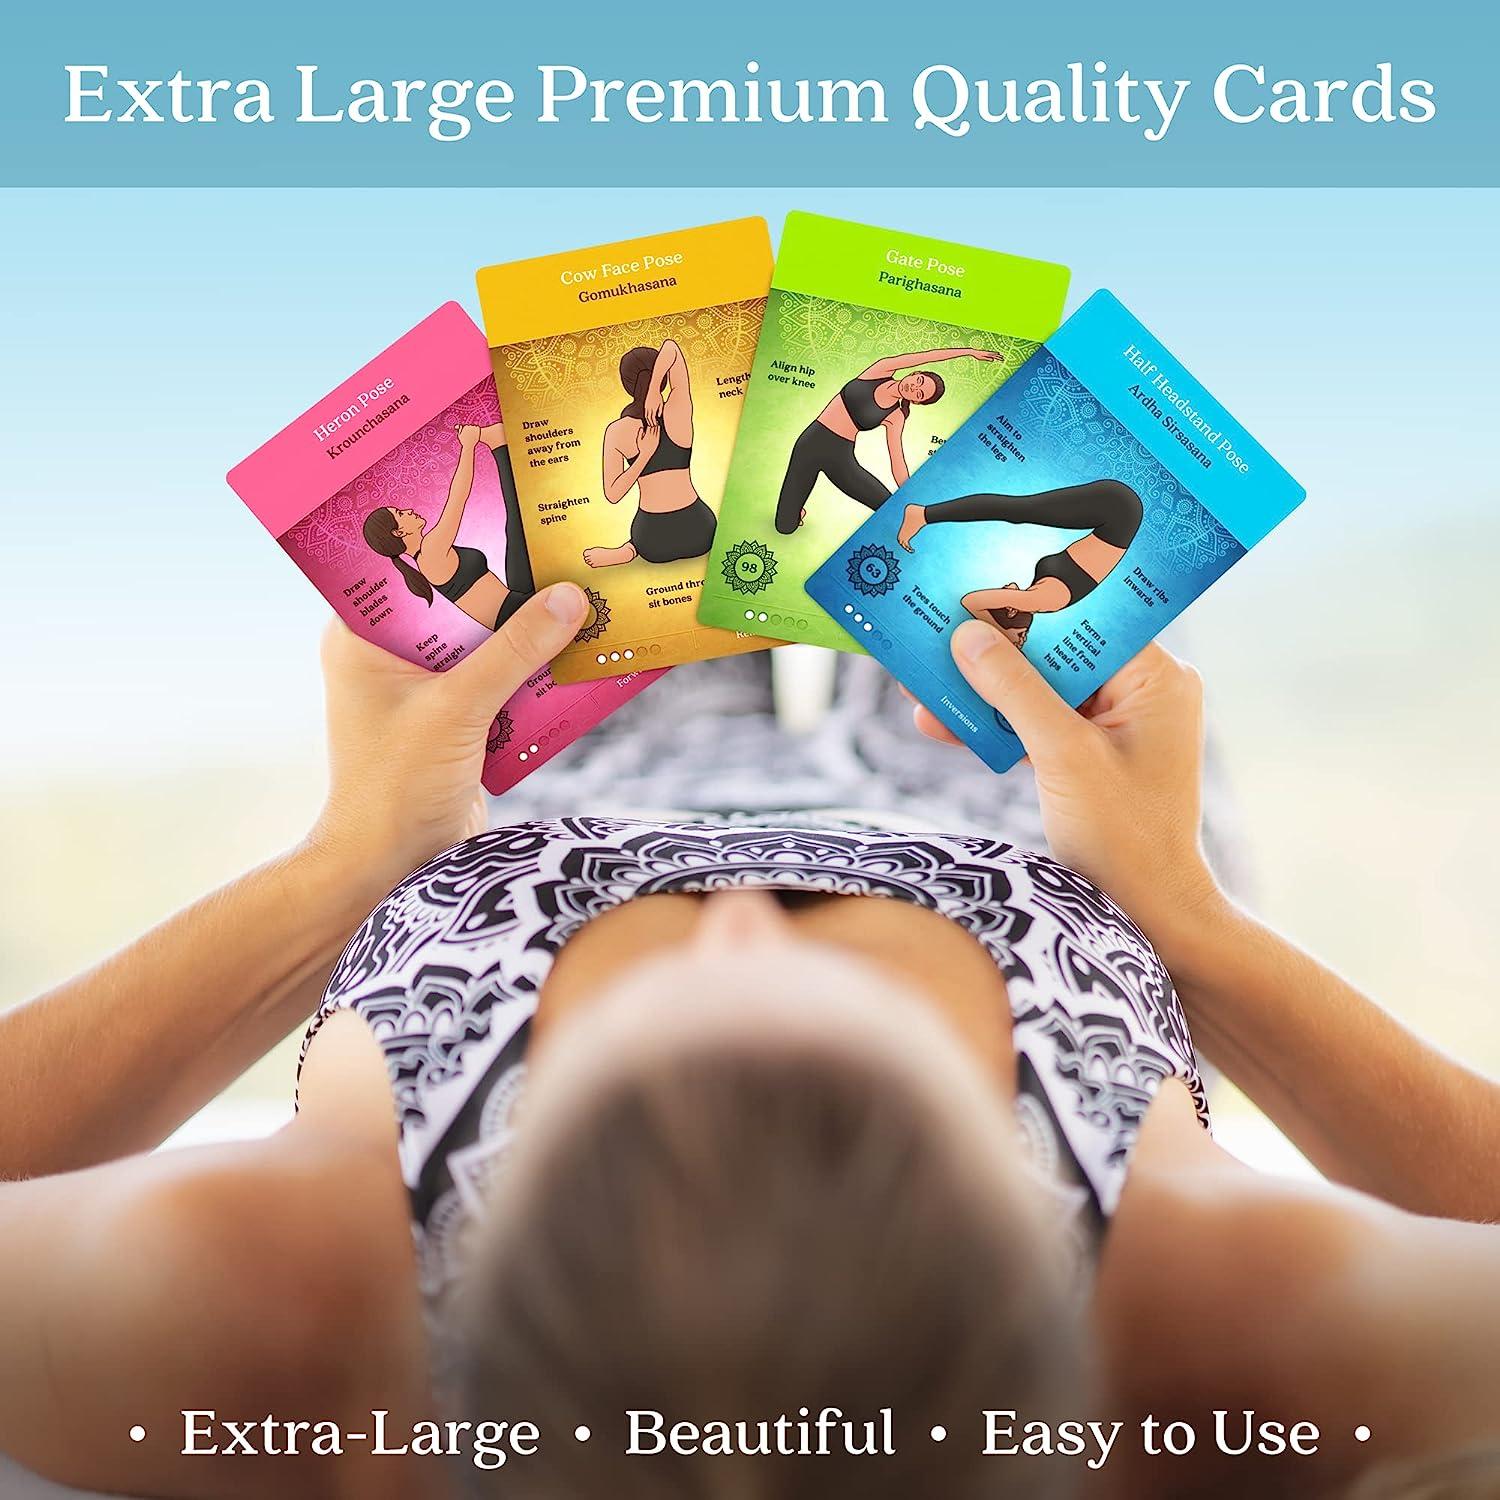 Amazon.com: Stack 52 Yoga Exercise Cards: Designed by Certified Yoga  Instructor. Video Instructions Included. Beginner to Advanced Poses and  Asana Workout Games. Improve Fitness and Flexibility. (Mega Pack) : Sports  & Outdoors